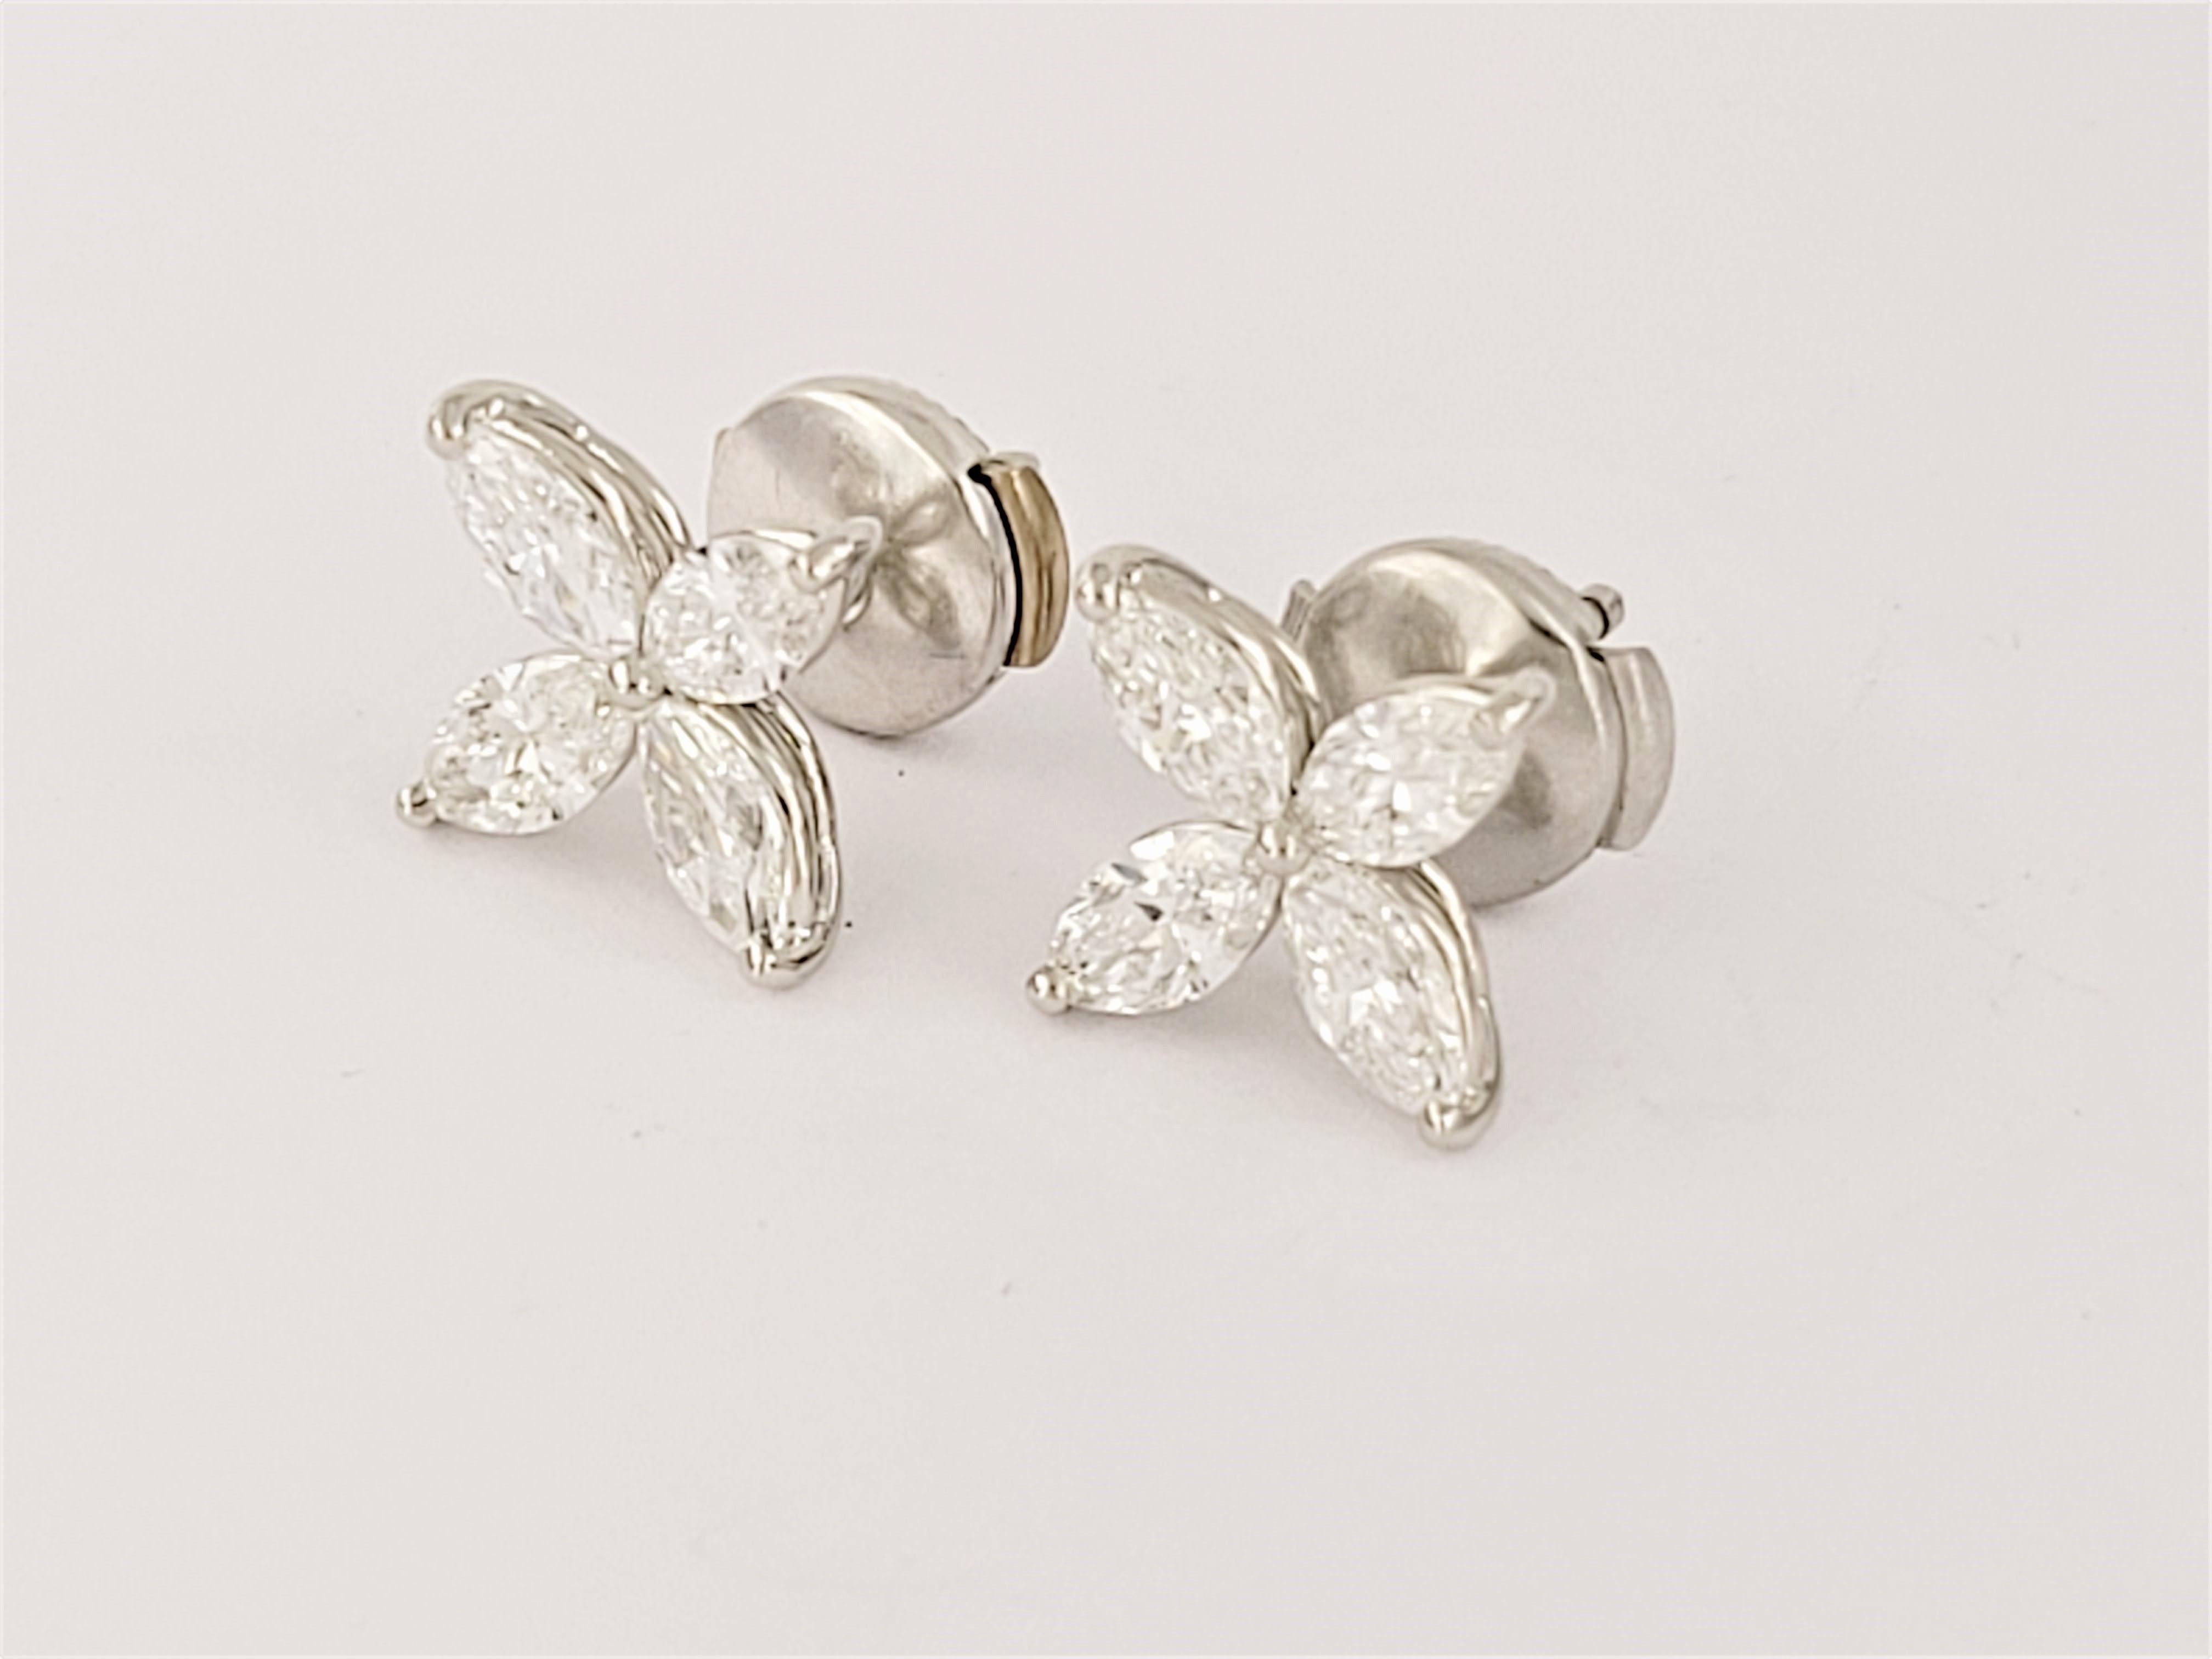 Tiffany Victoria Diamond Earrings in PT950 Medium In New Condition For Sale In New York, NY